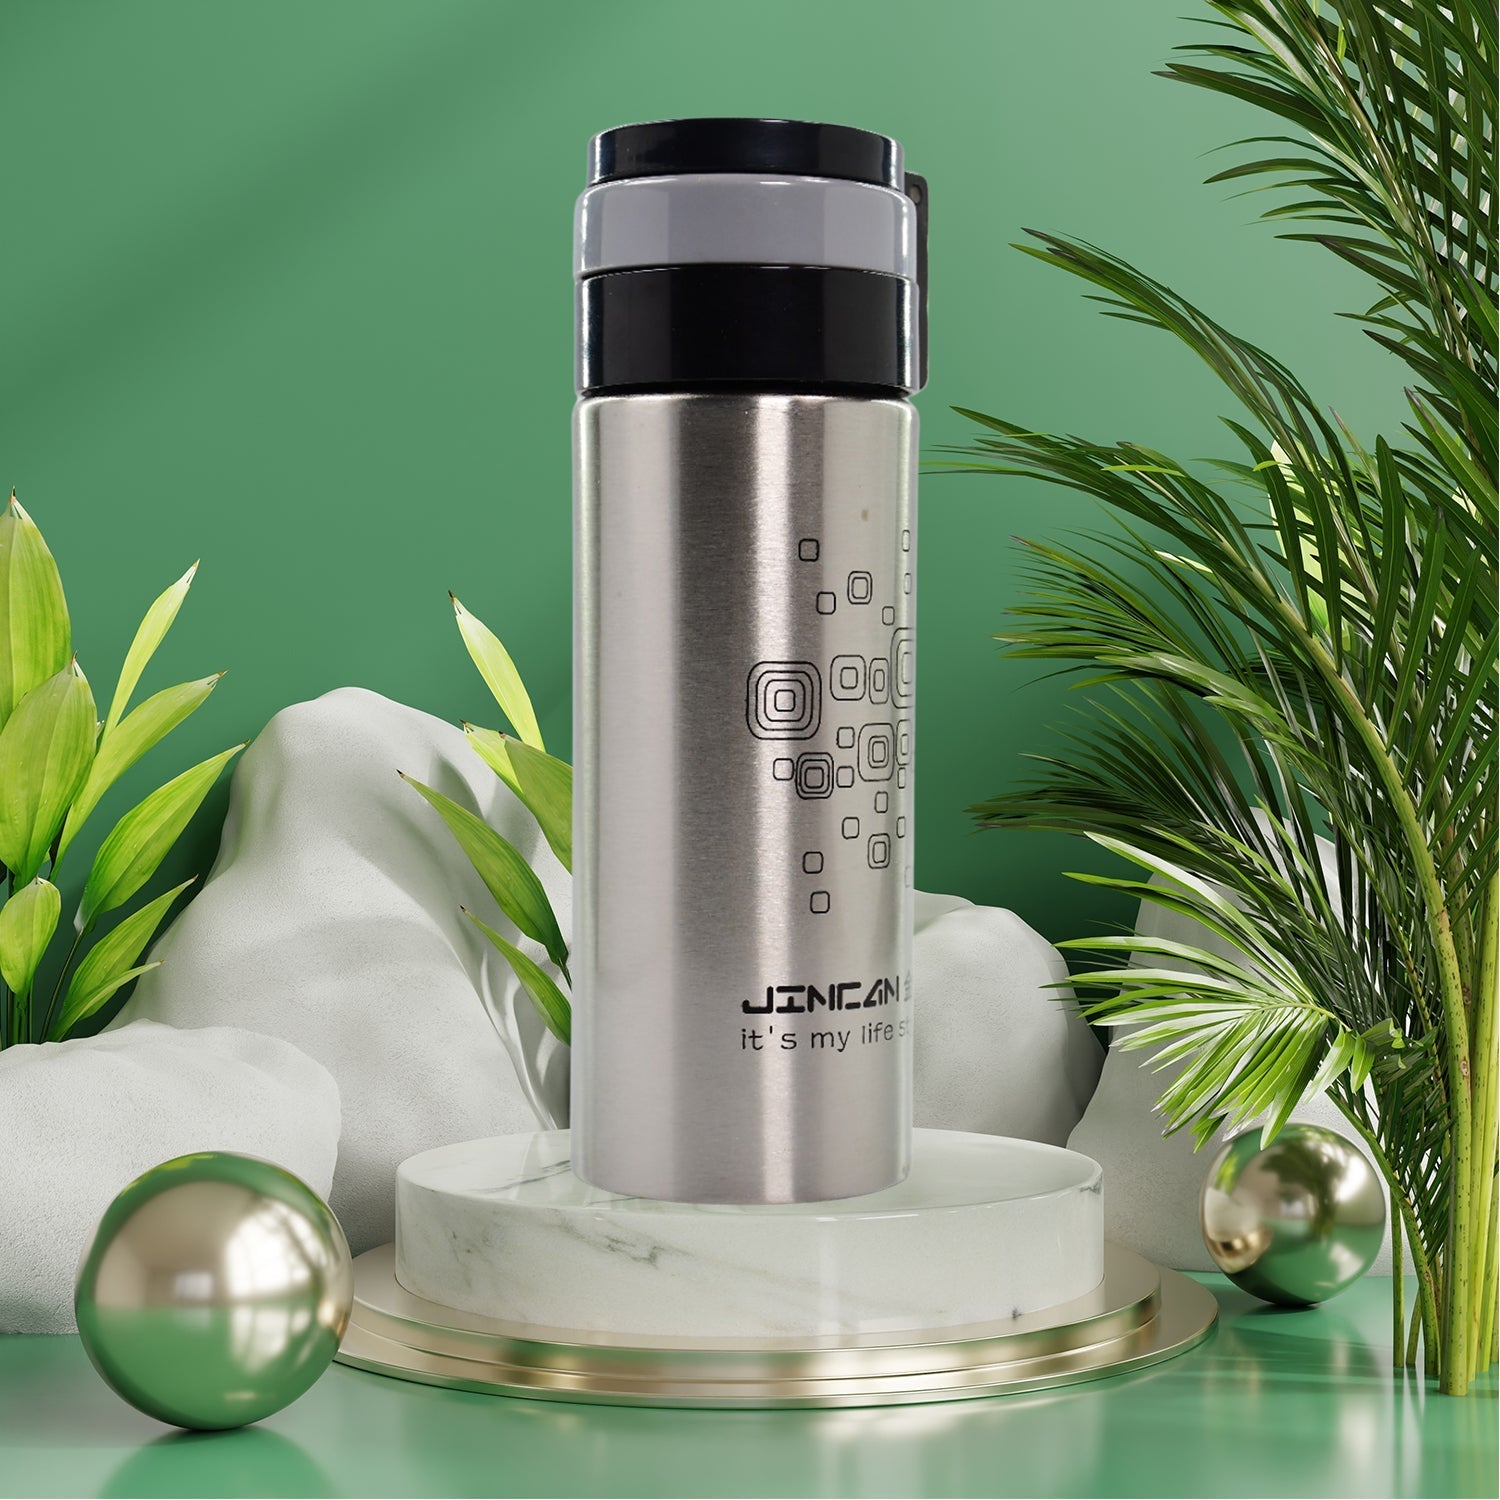 6450 450Ml STAINLESS STEEL WATER BOTTLE WITH RING CAP FOR MEN WOMEN KIDS | THERMOS FLASK | REUSABLE LEAK-PROOF THERMOS STEEL FOR HOME OFFICE GYM FRIDGE TRAVELLING DeoDap